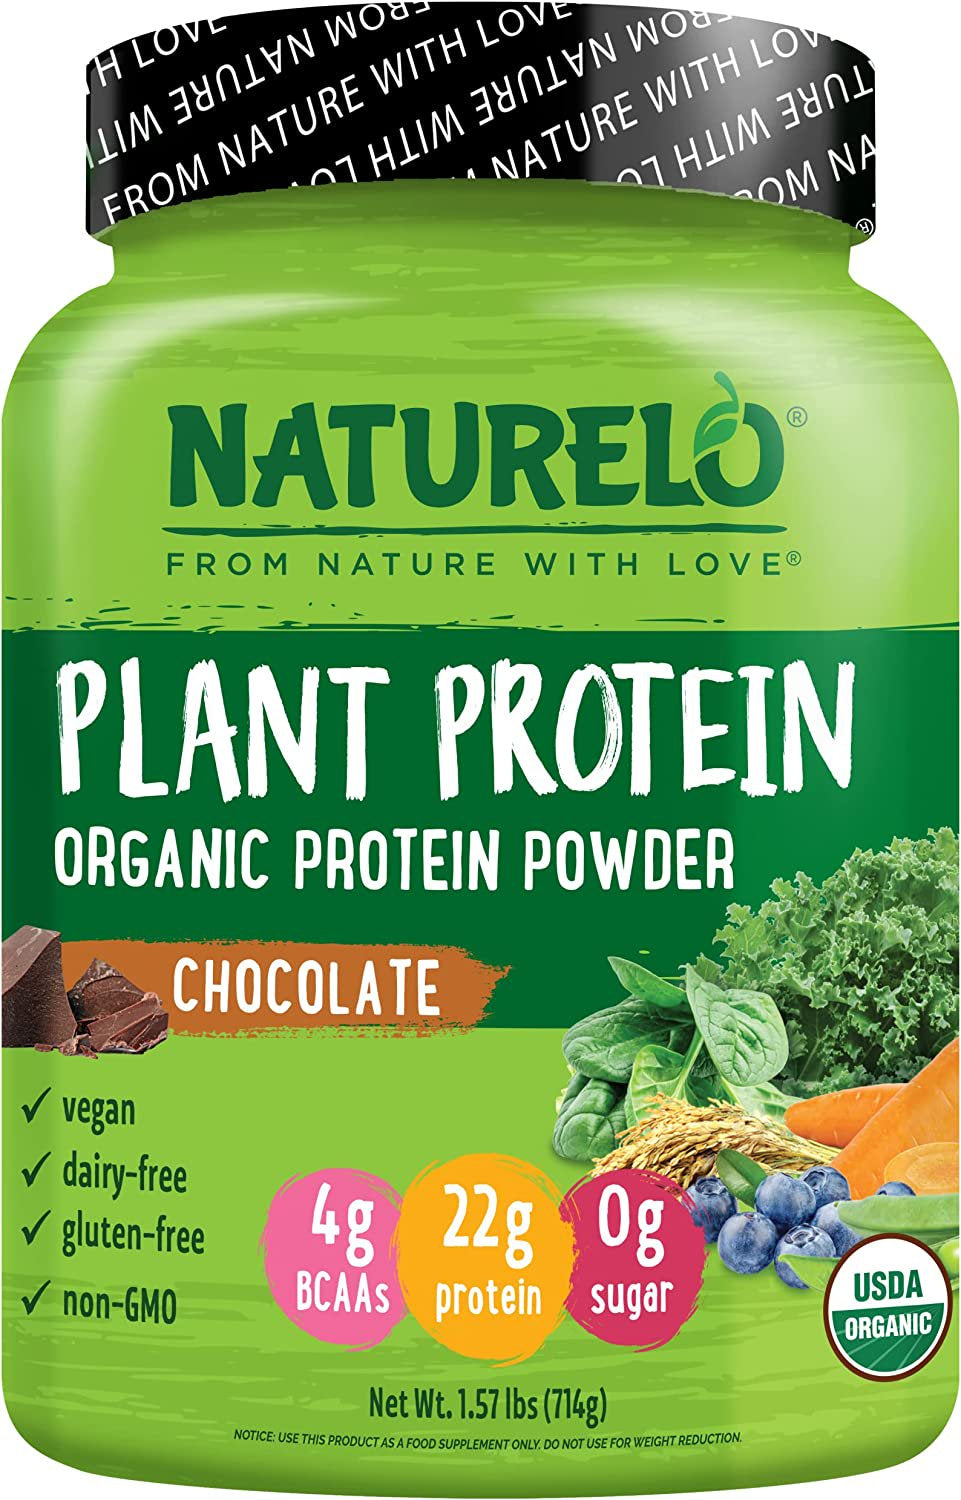 NATURELO Plant Protein Powder, Chocolate, 22G Protein - Non-Gmo, Vegan, No Gluten, Dairy, or Soy - No Artificial Flavors, Synthetic Coloring, Preservatives, or Additives - 20 Servings